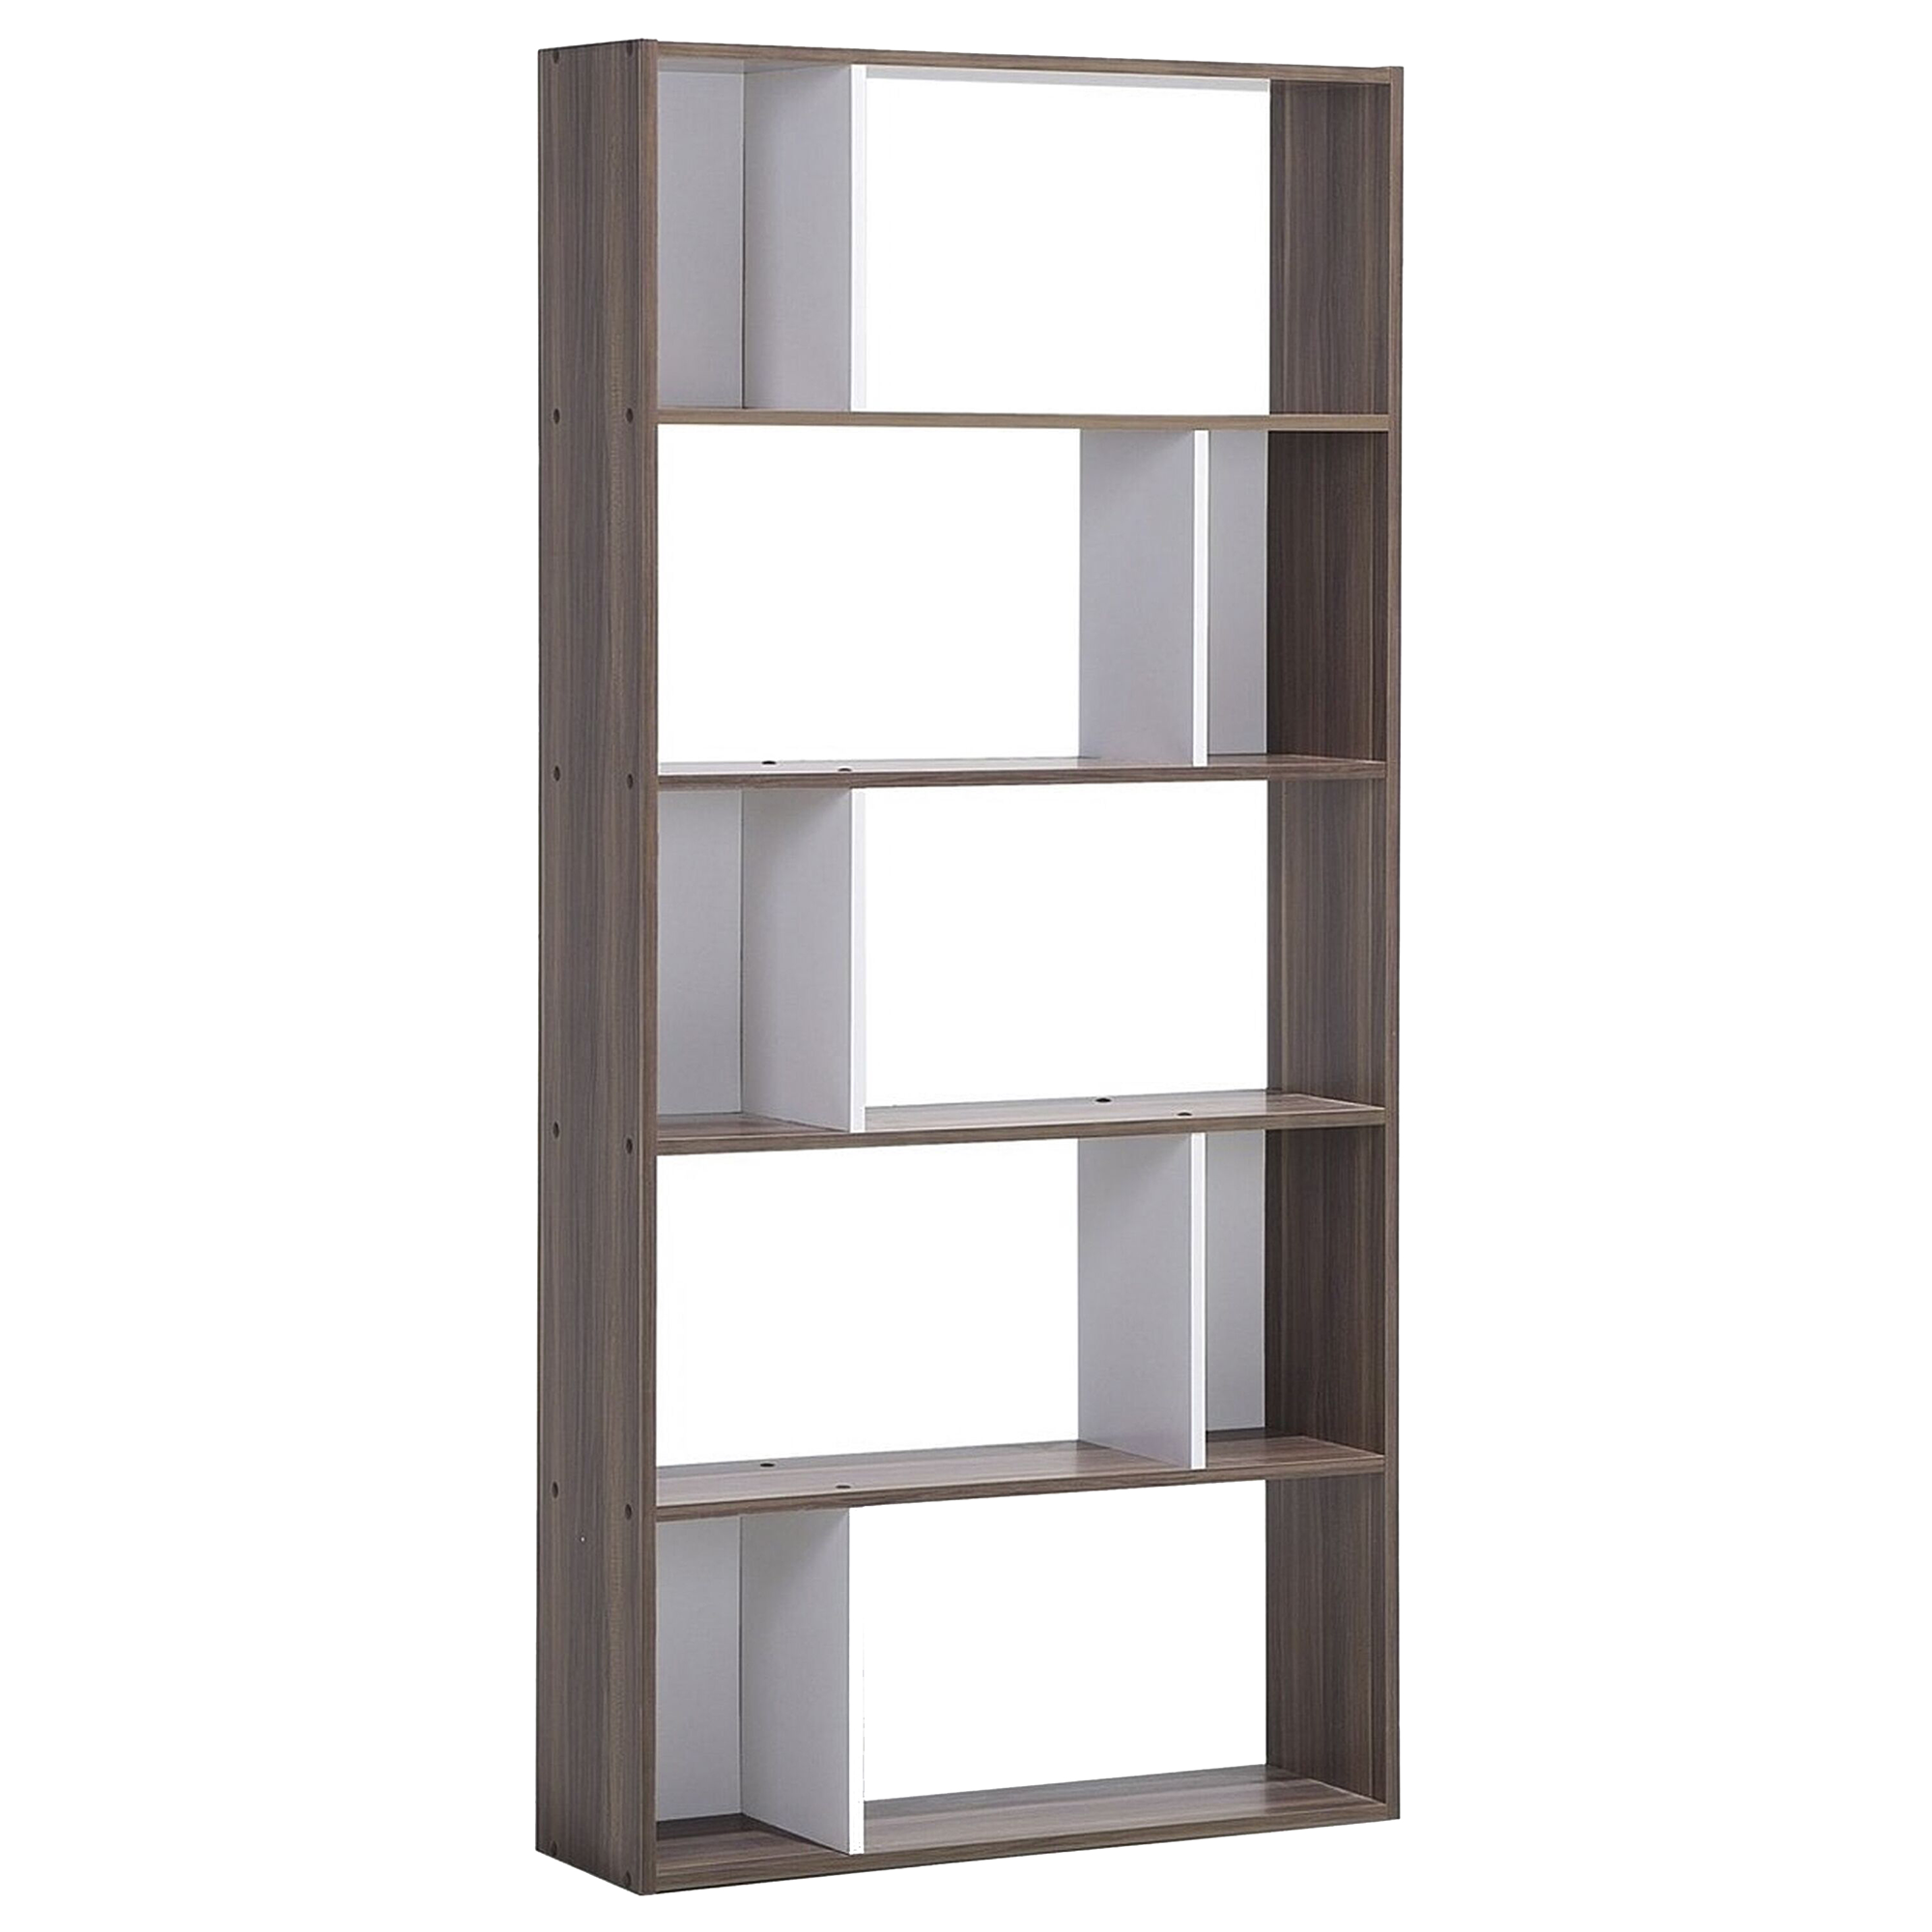 Beliani Bookcase Dark Wood and White 174 x 83 cm Large and Small Shelves Scandinavian